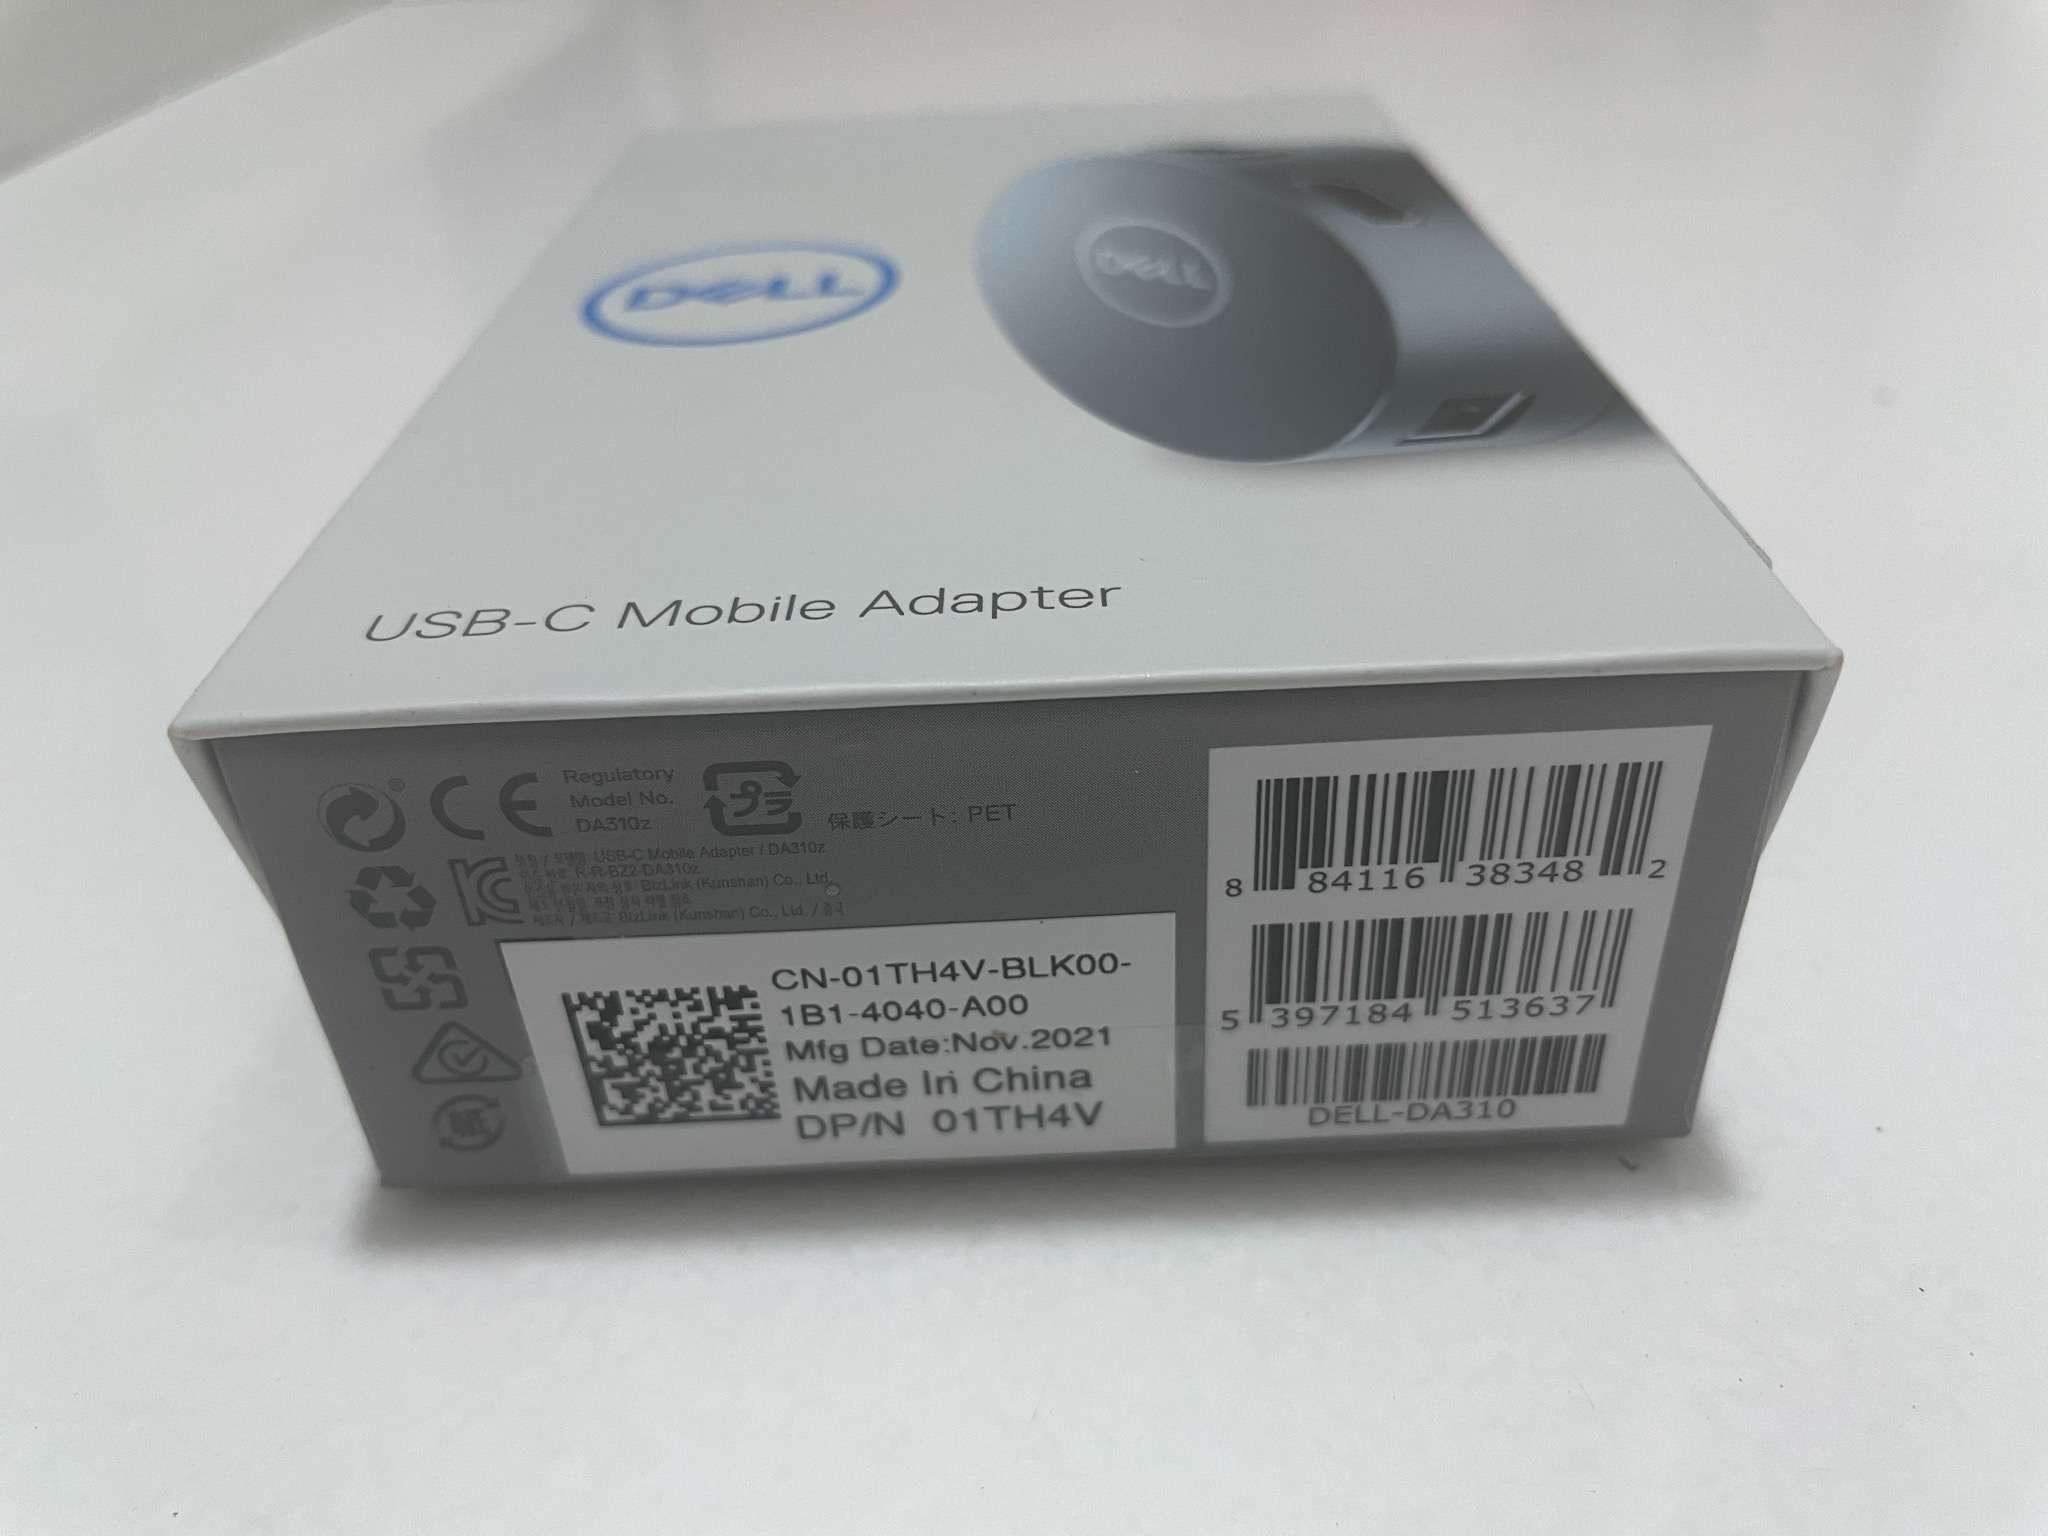 Dell DA310 7-in-1 USB-C Multiport Adapter – Rs.6410 – LT Online Store